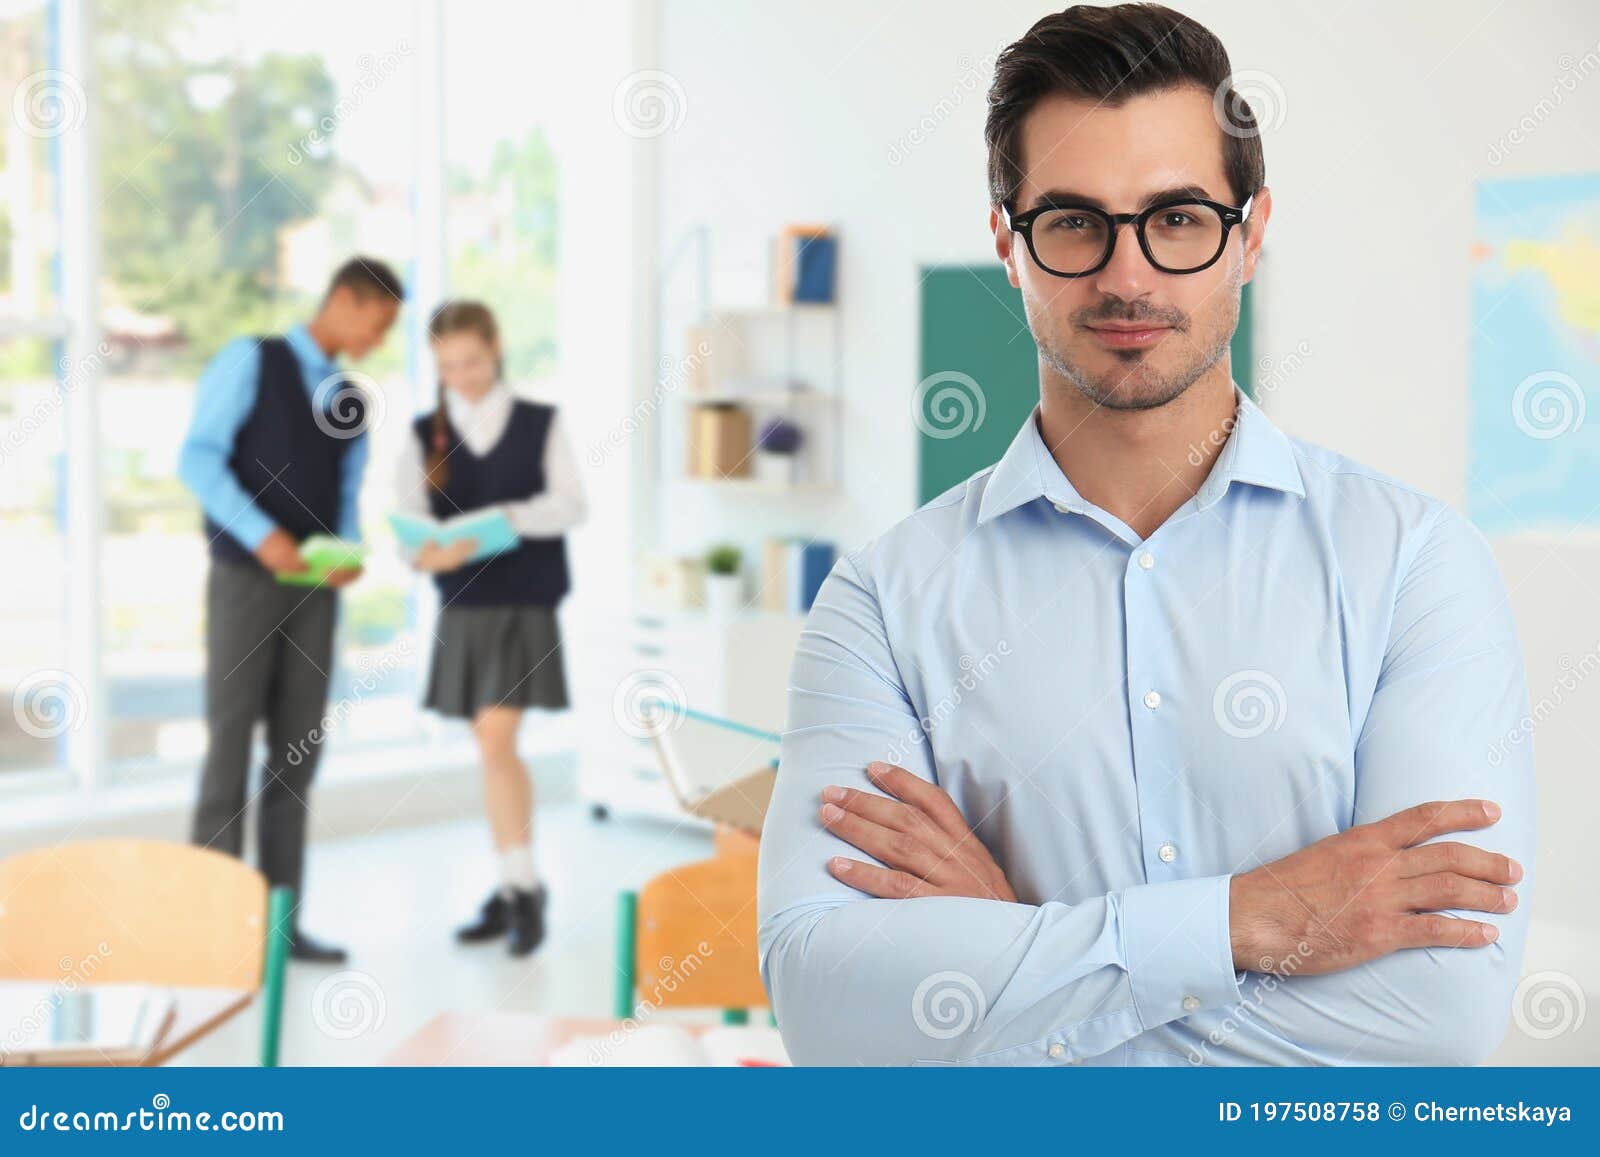 Young School Teacher In Classroom Stock Photo Image Of College